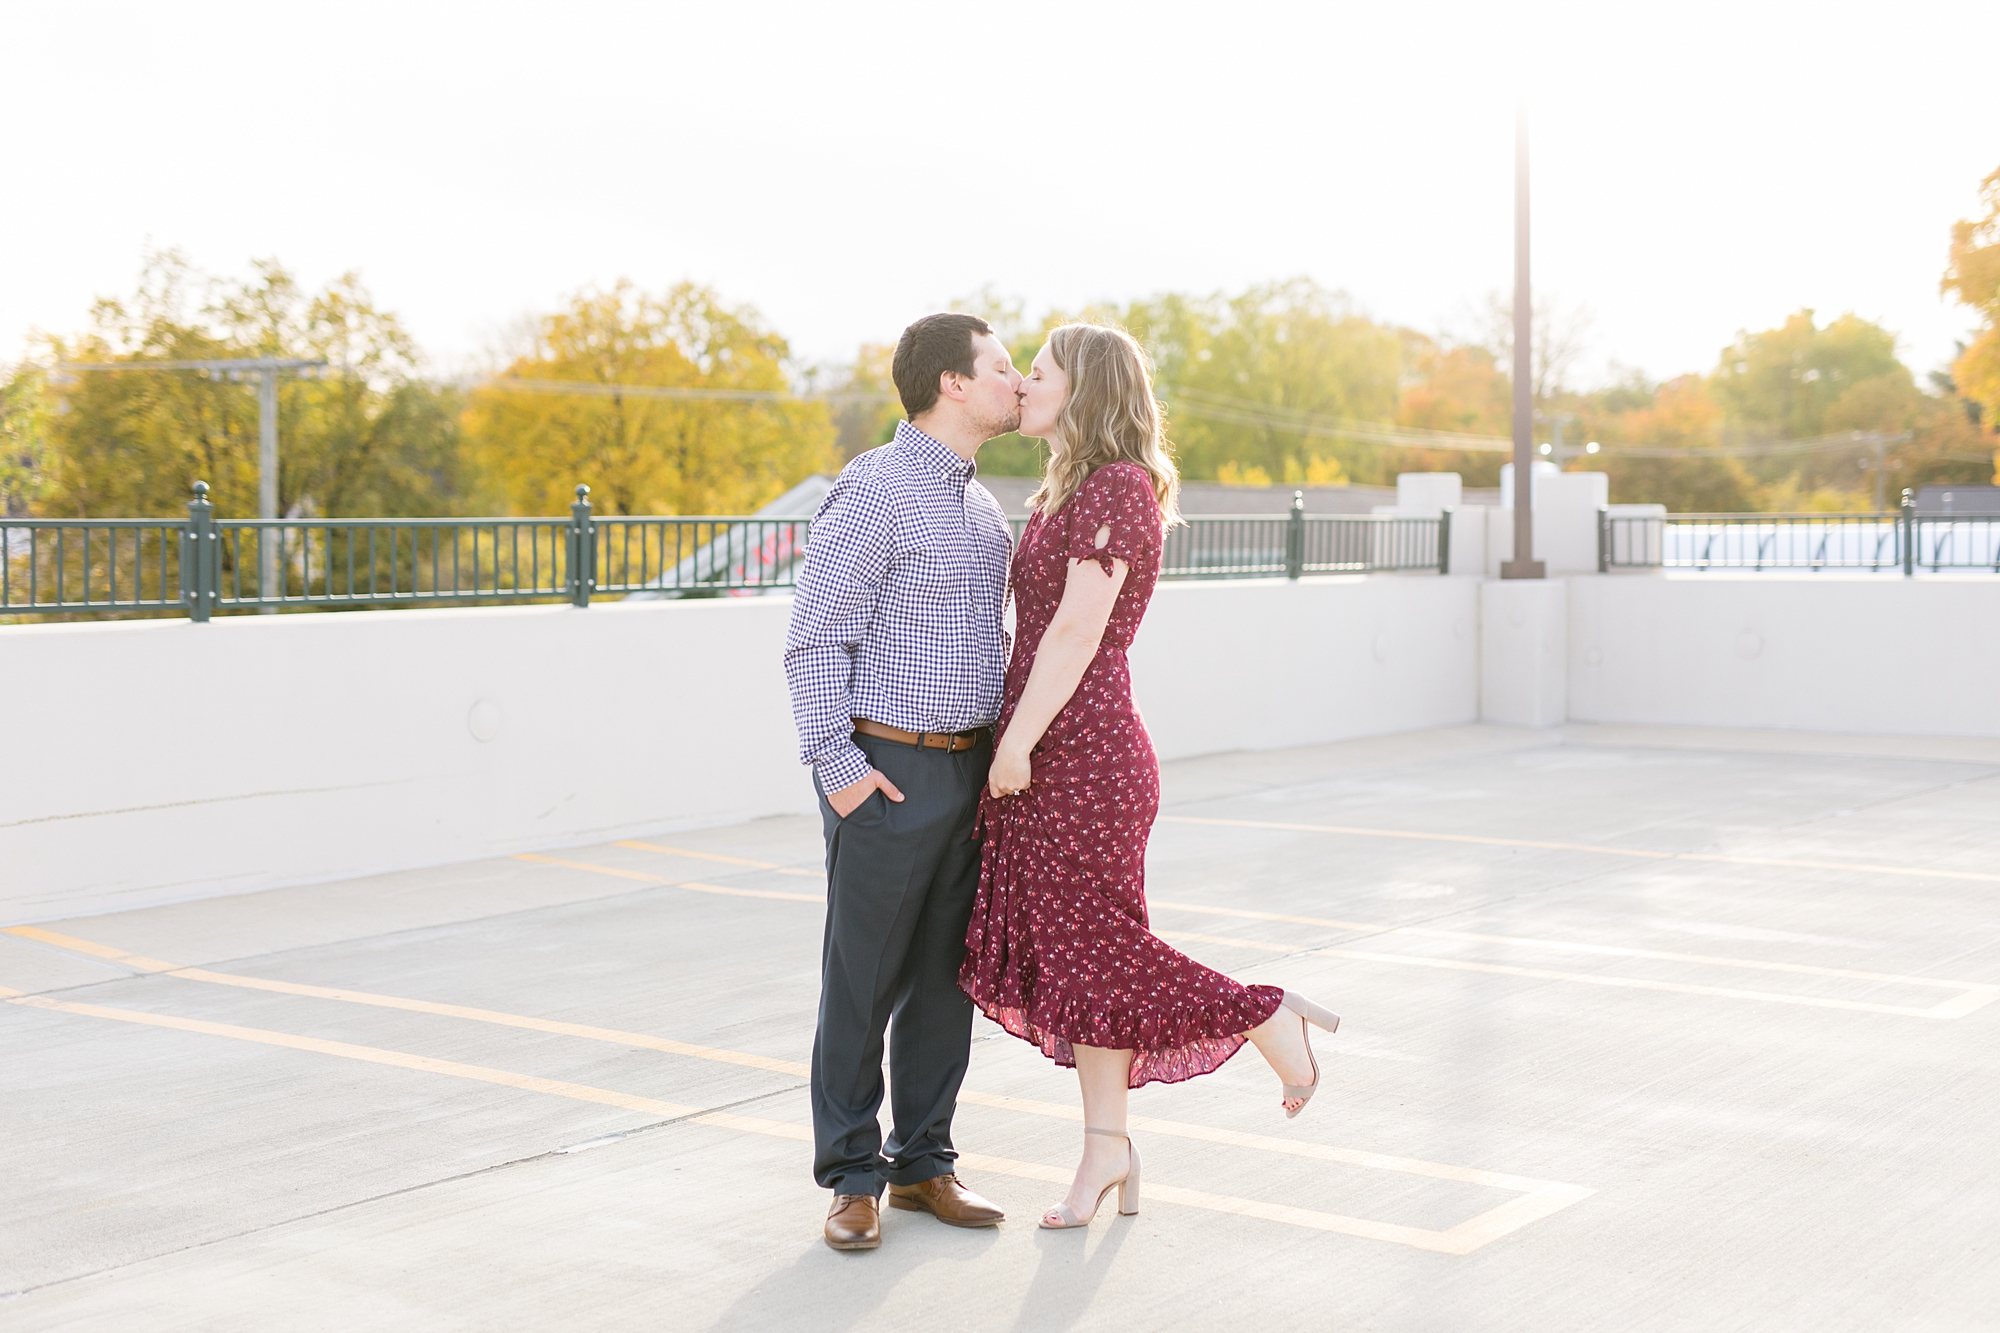 Amanda and Kevin Engagement Session | Breanne Rochelle Photography